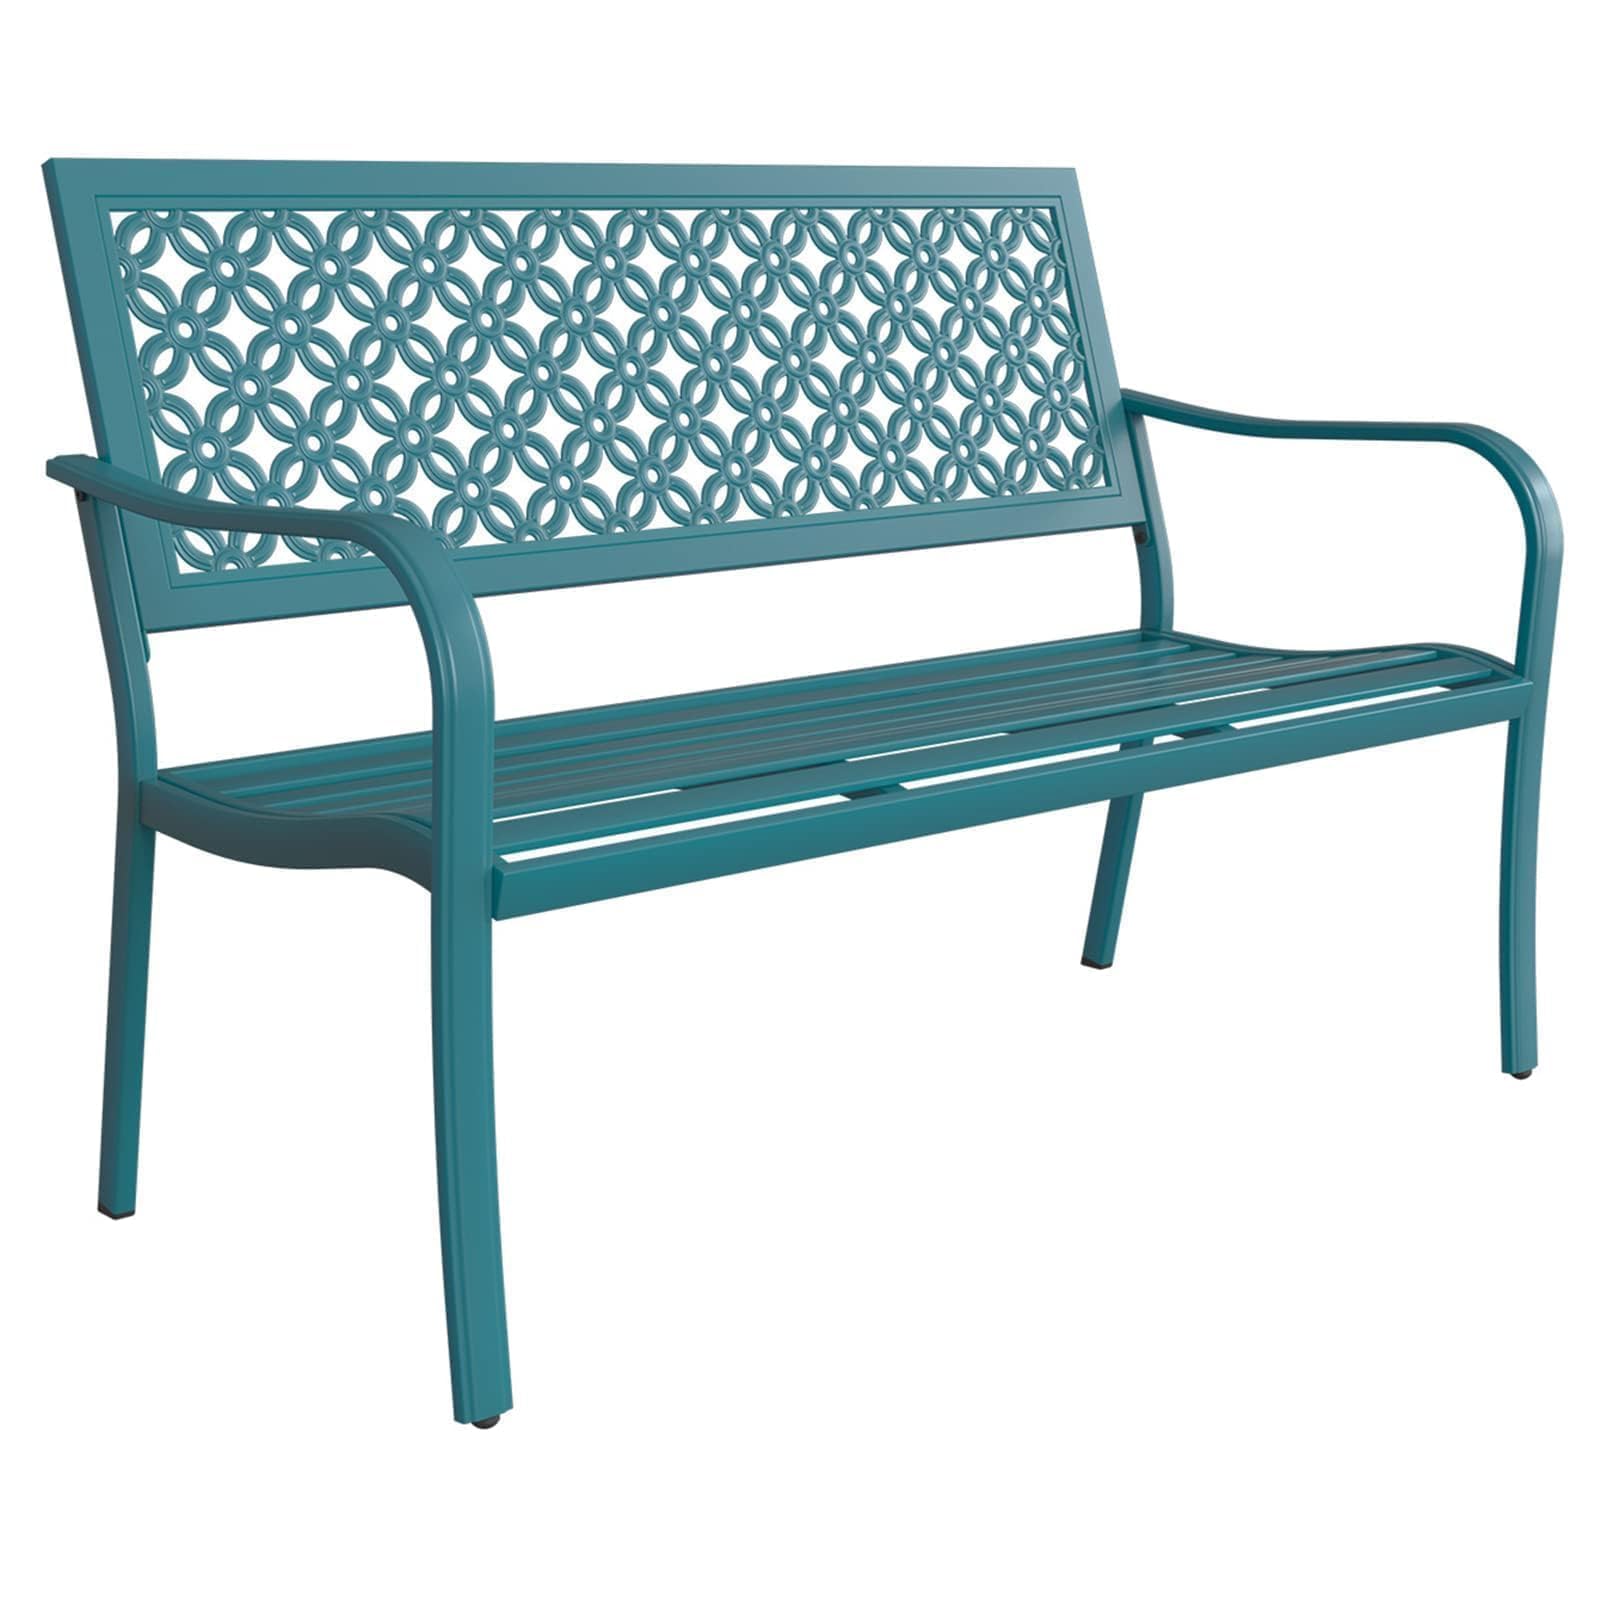 Grand patio Outdoor Bench Garden Bench with Armrests Steel Bench for Outdoors Lawn Yard Porch Lake Shore